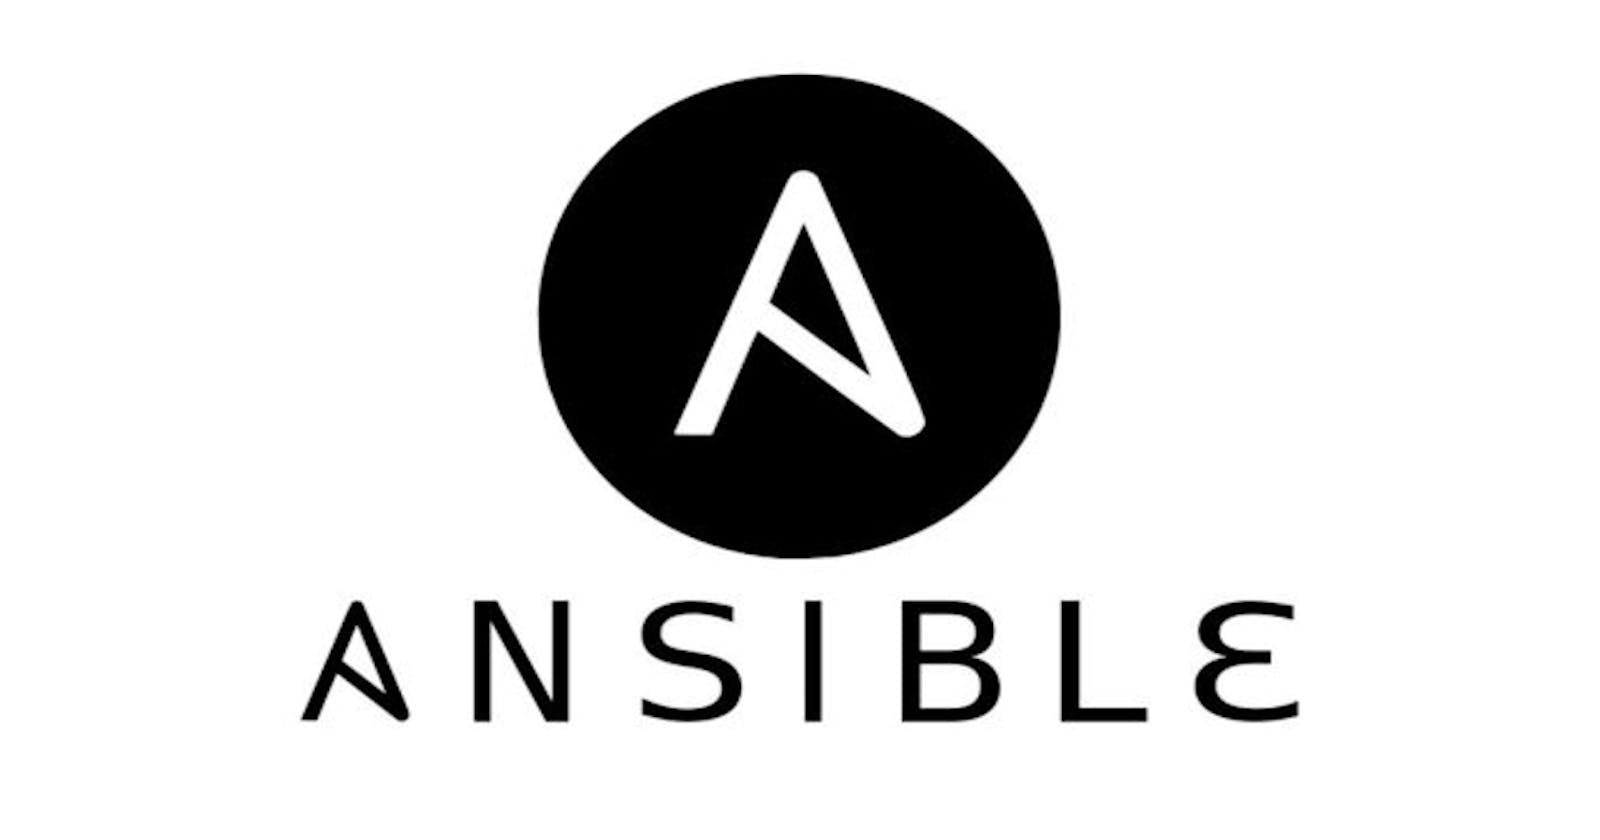 How to install Ansible on RHEL 9 😇